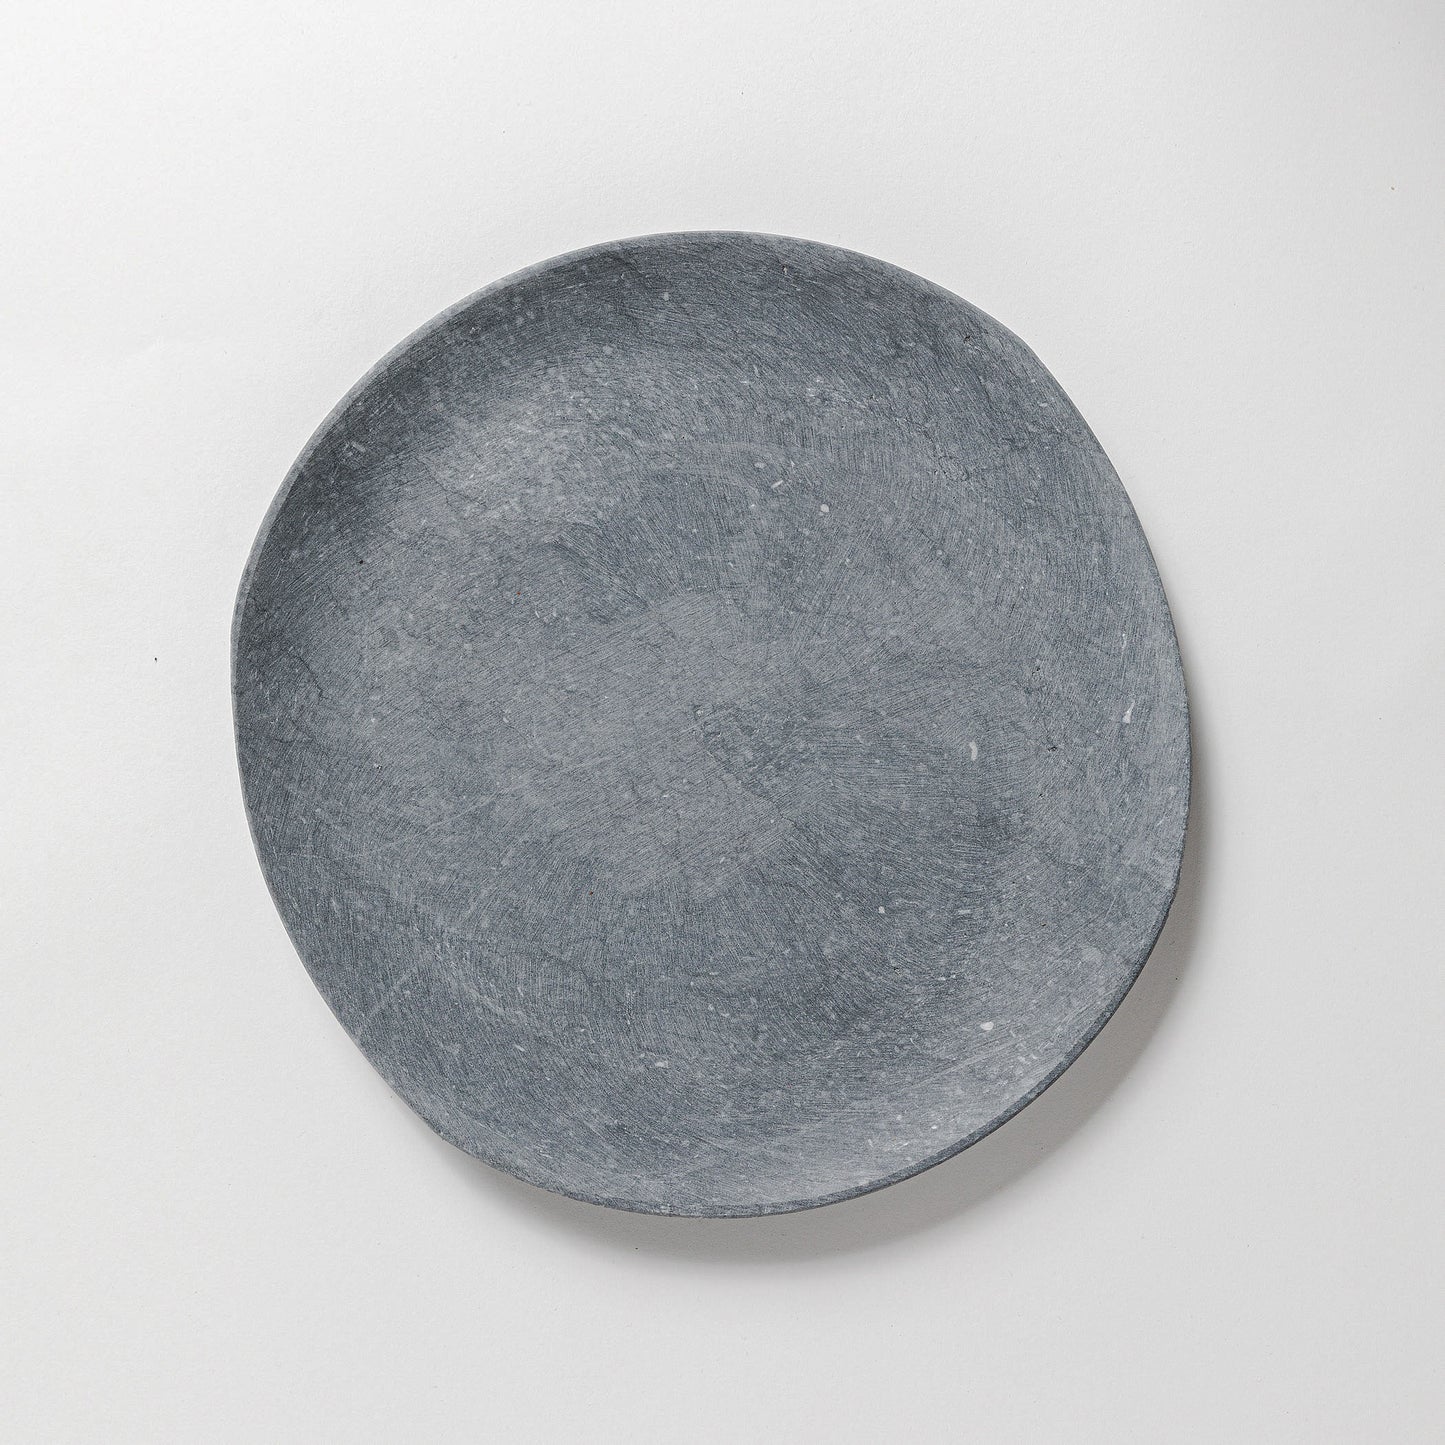 Large Plate - Nordic Gray